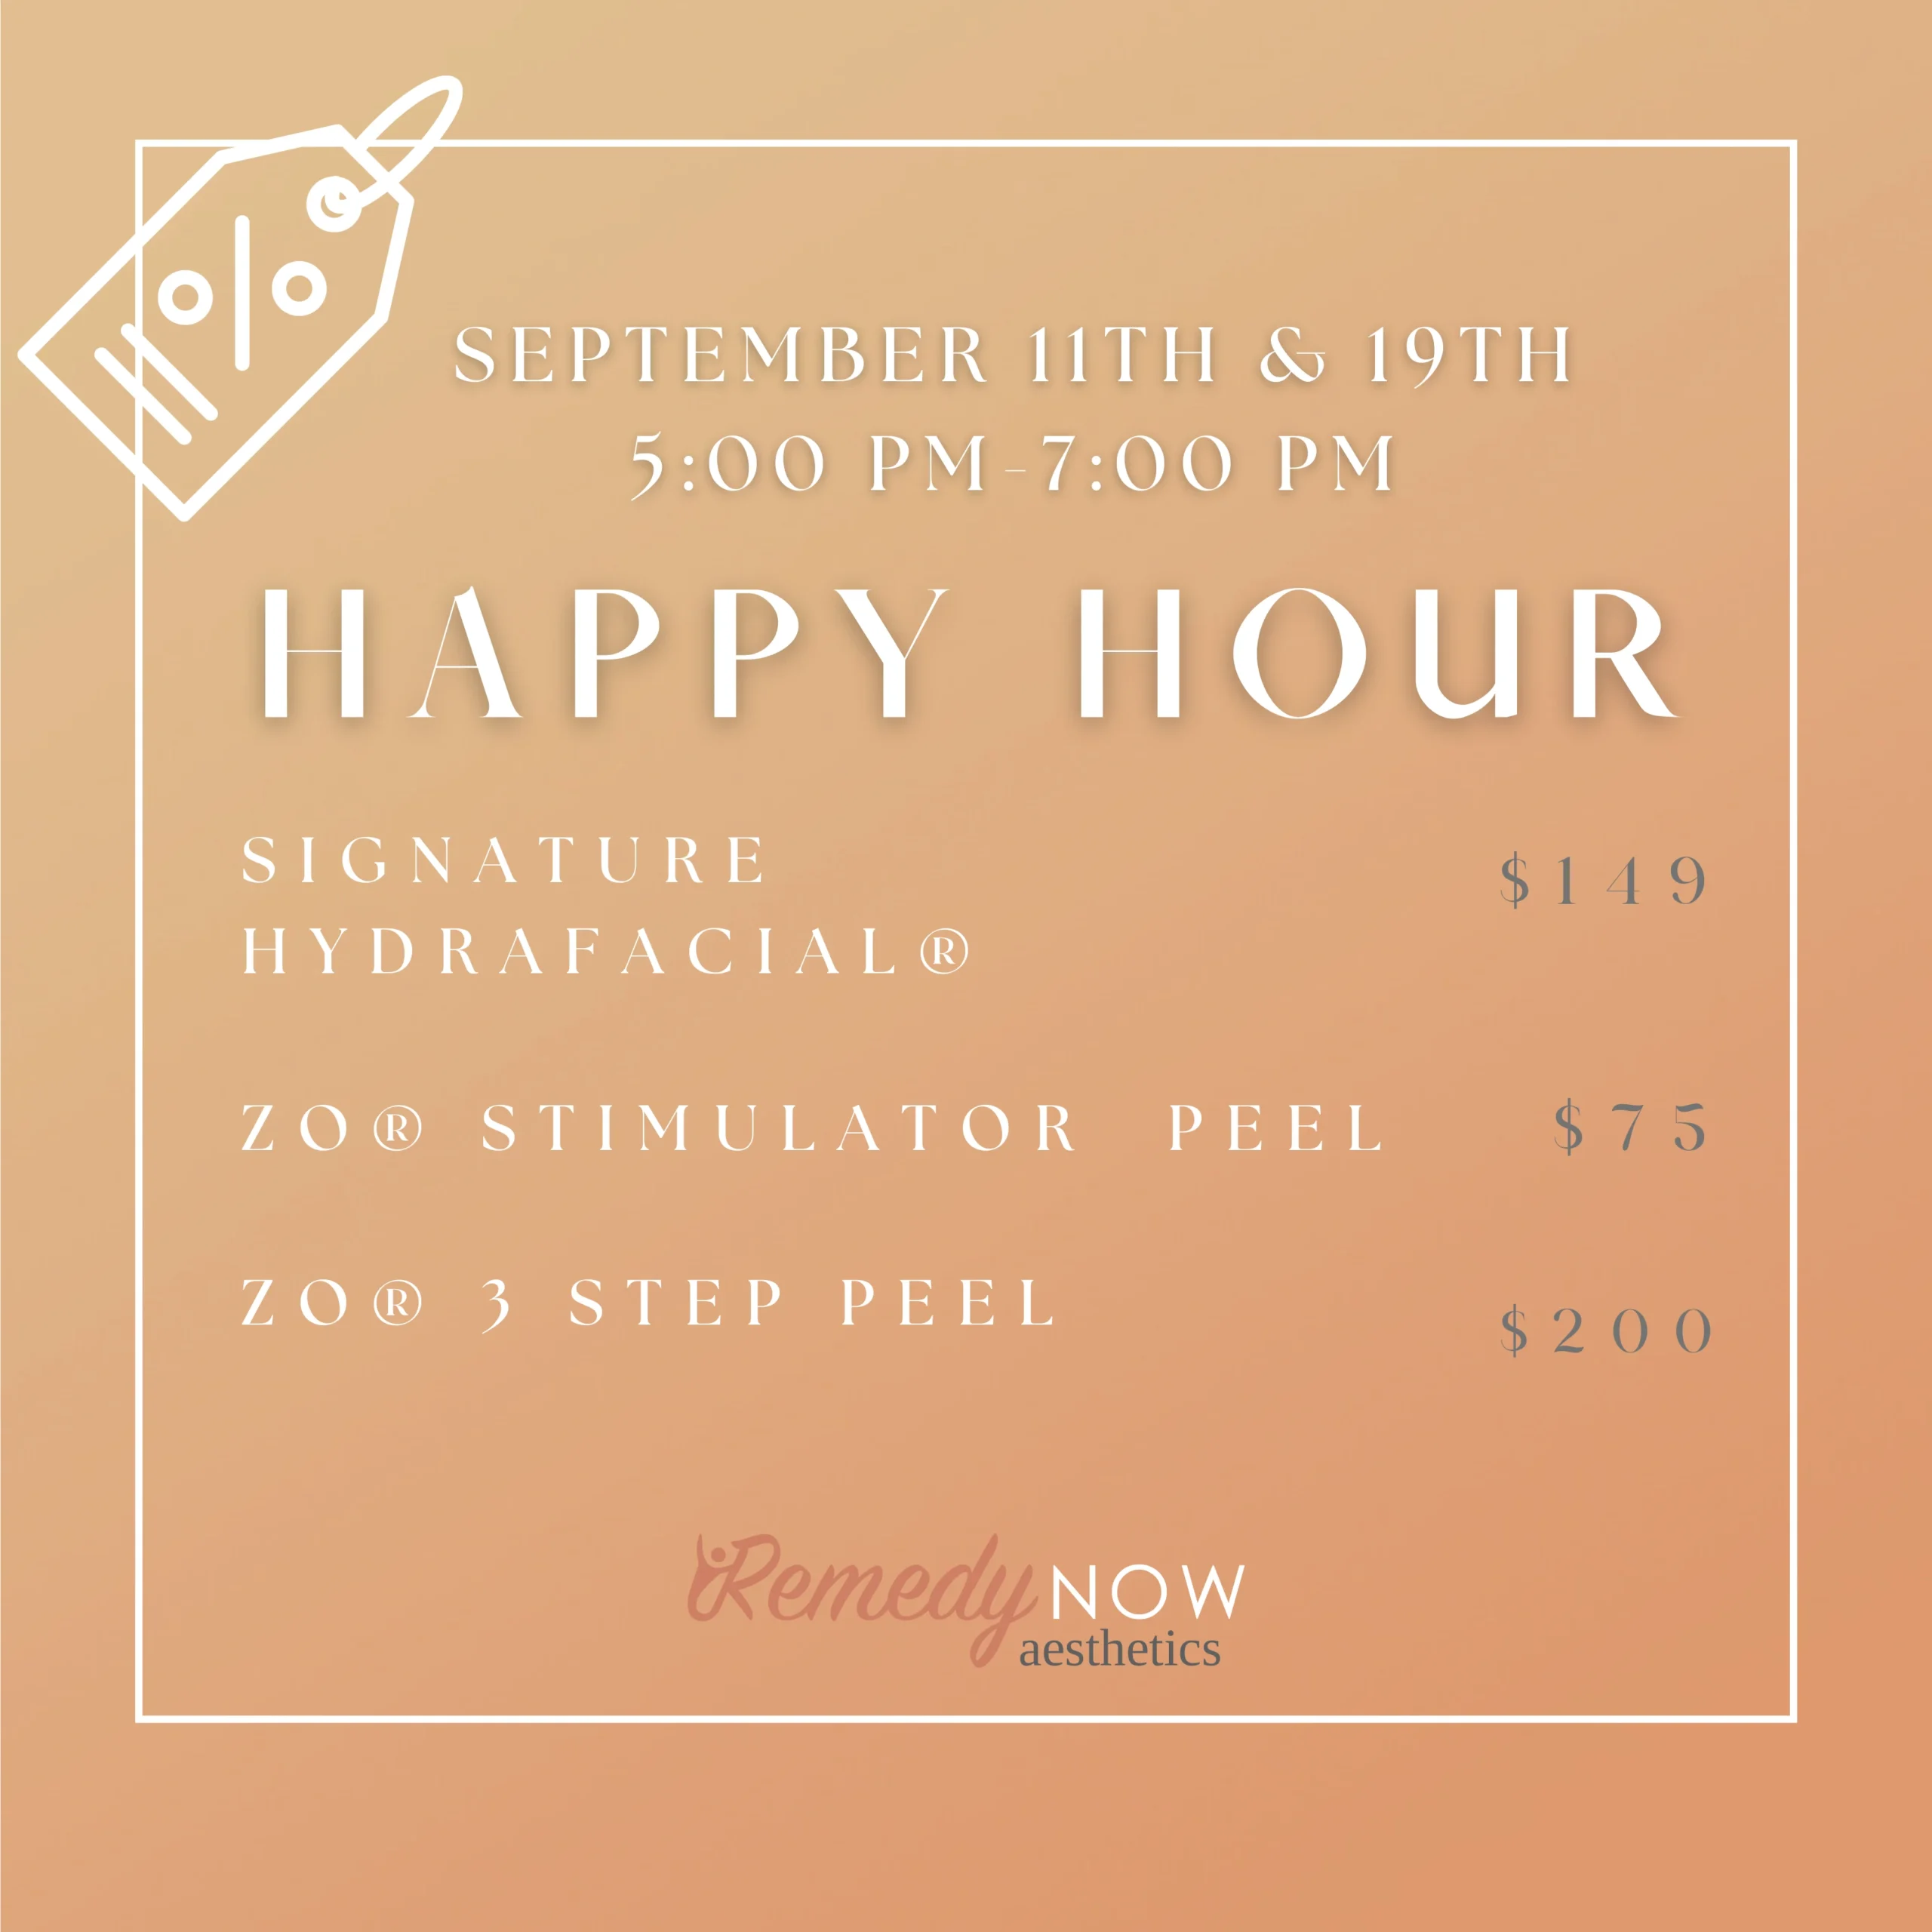 Happy Hour - September 11th & 19th 5:00 PM 7:00 PM 